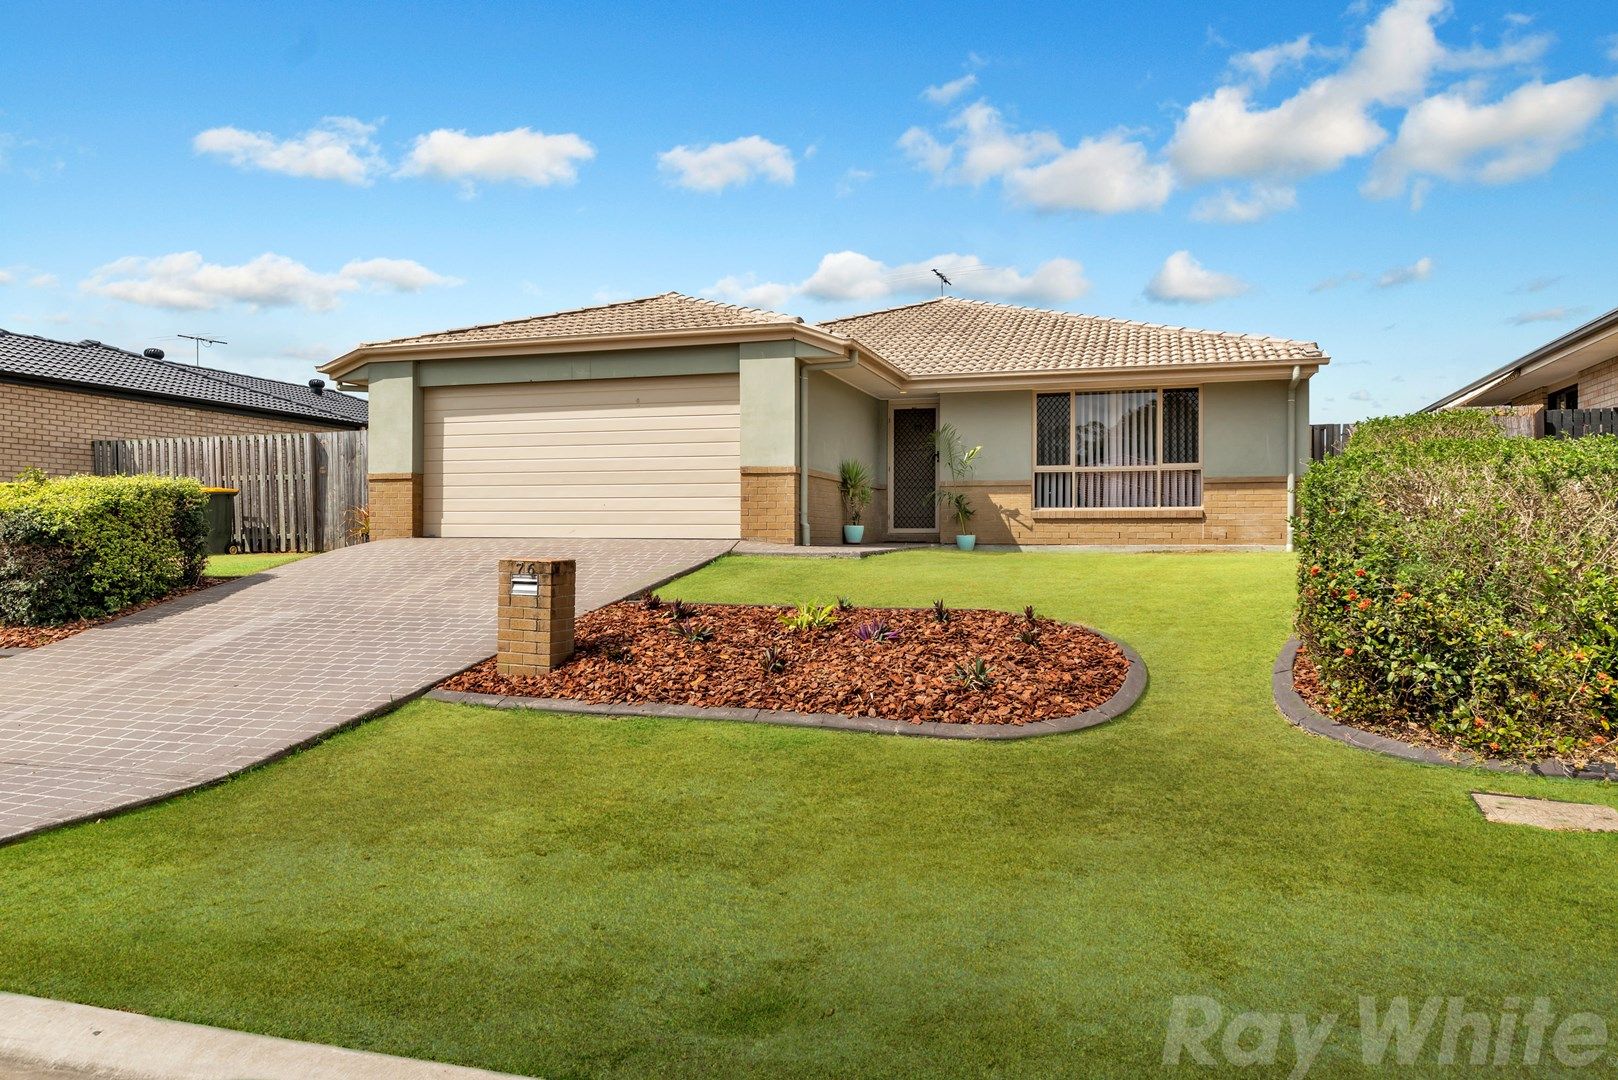 76 Hollywood Avenue, Bellmere QLD 4510, Image 0